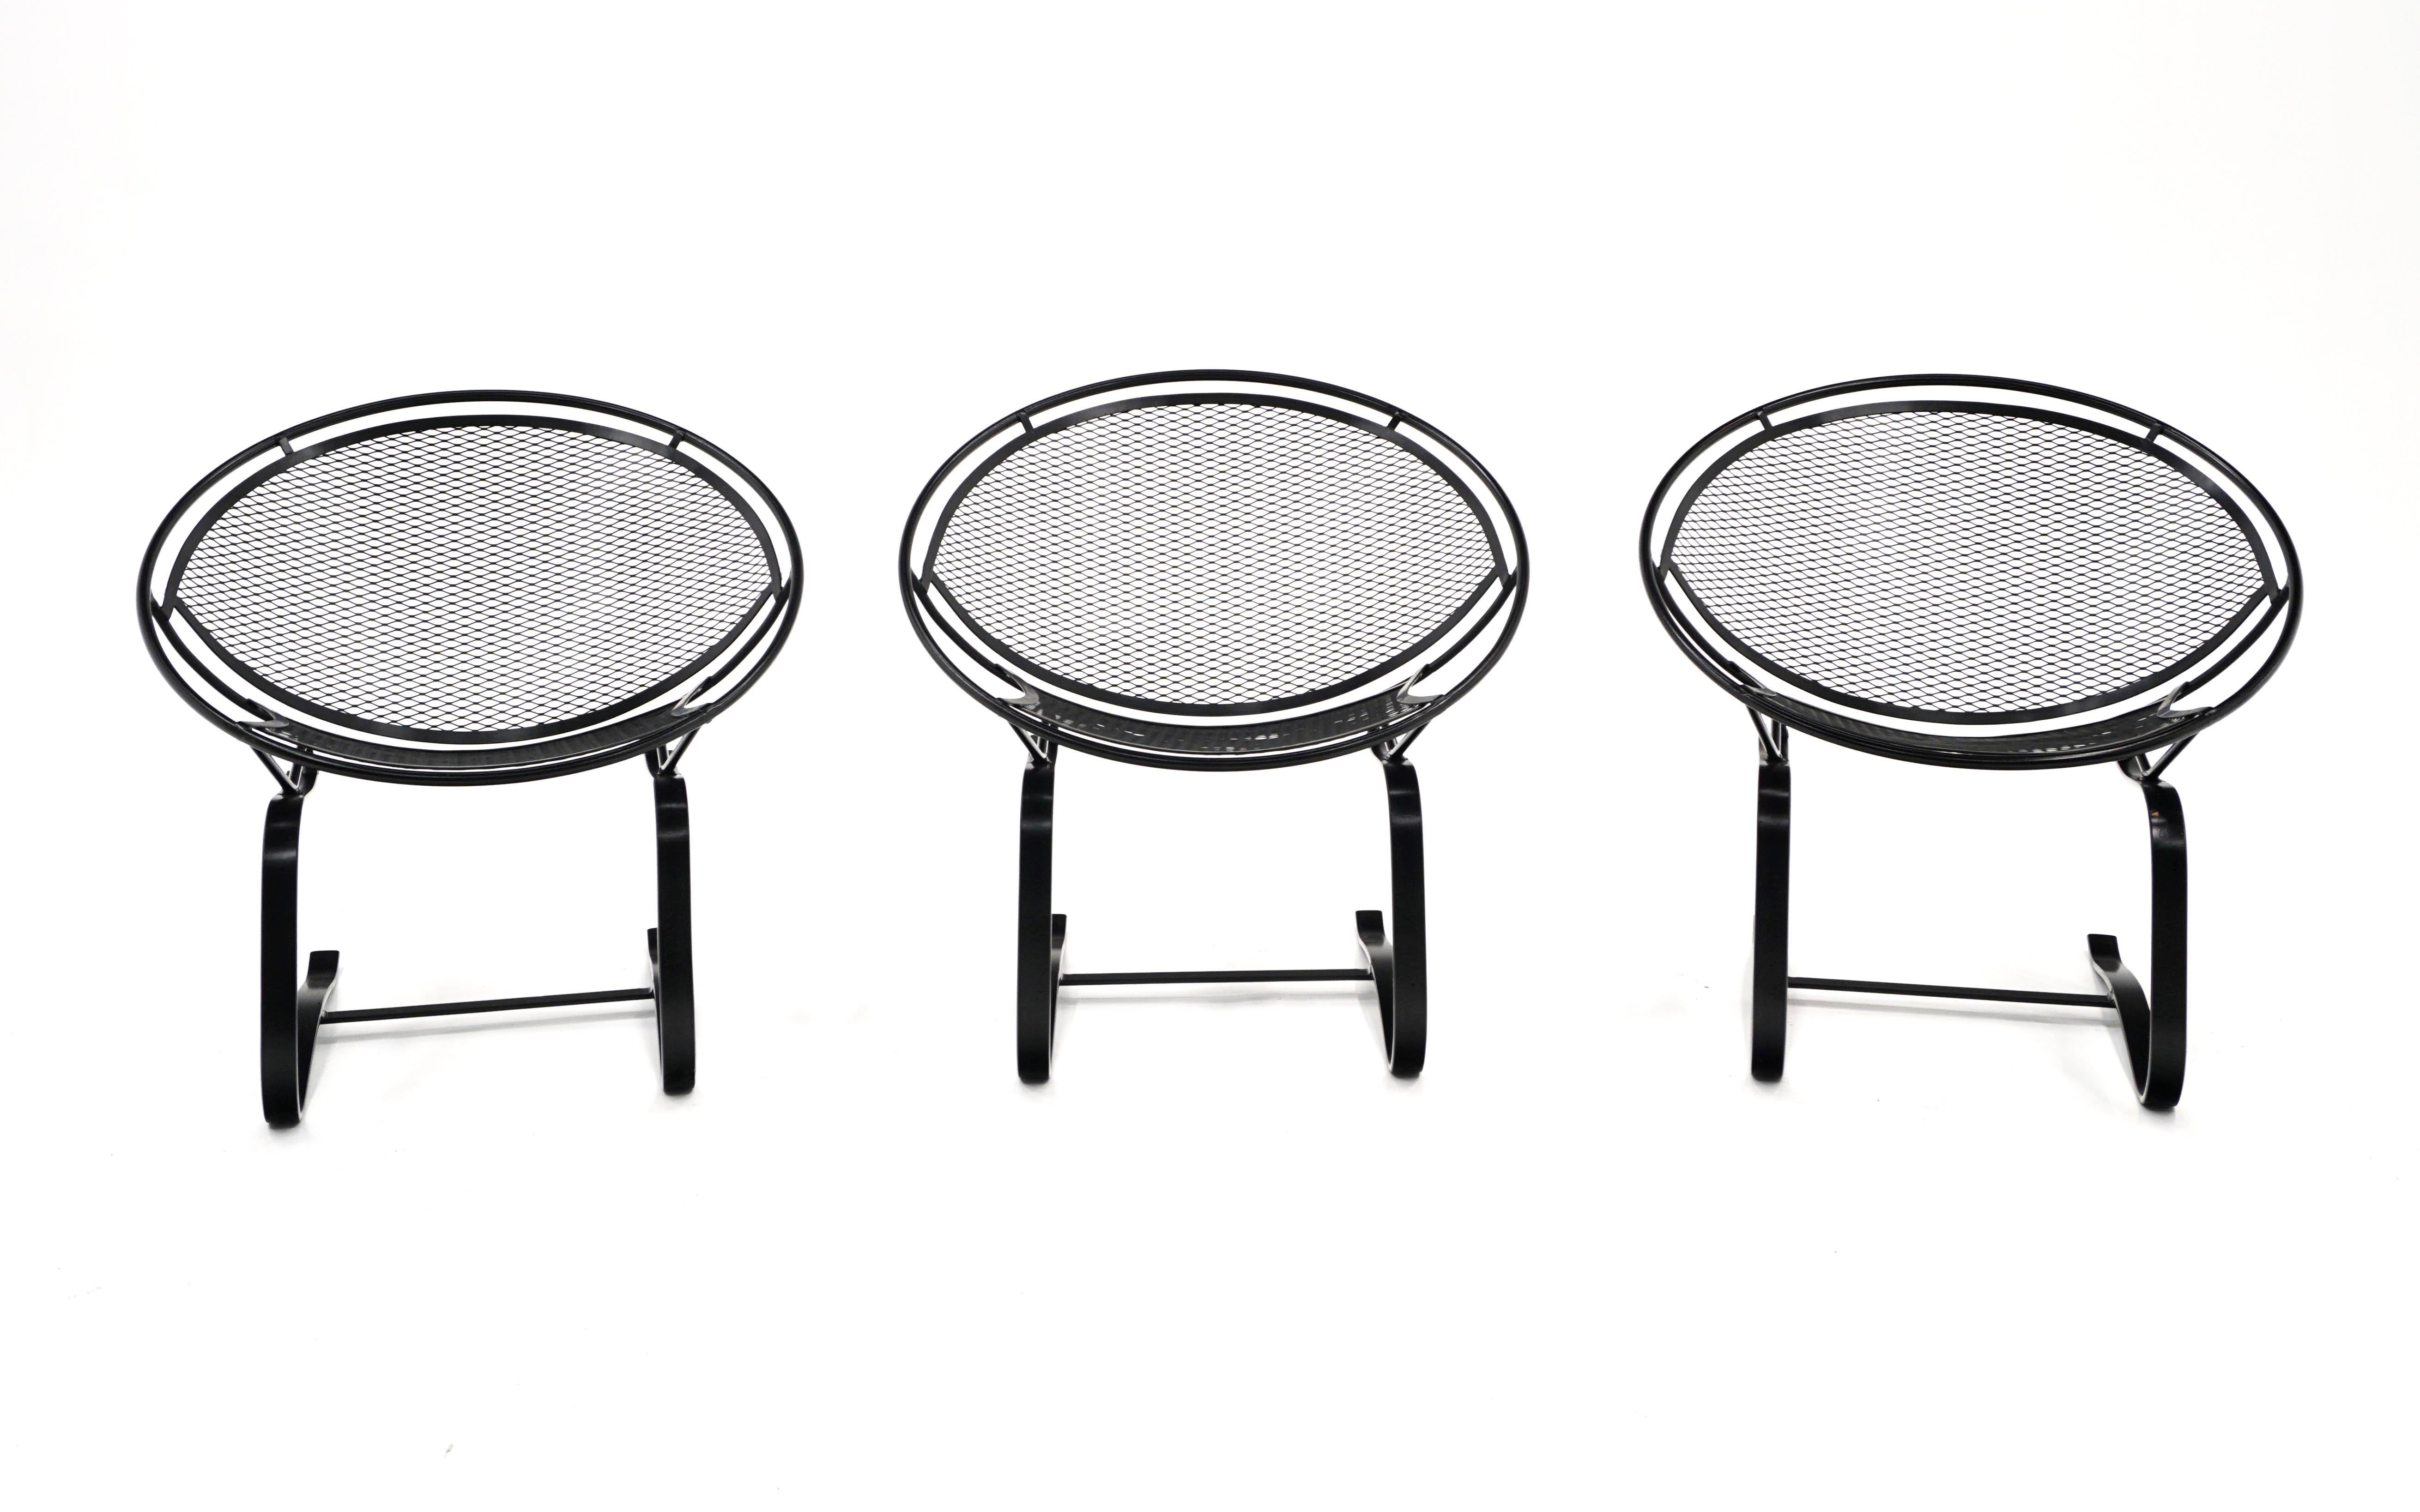 Three Salterini round rocking outdoor / pool / patio chairs. Professionally media blasted and powder coated in a satin black finish. Ready to use. Price is for each.